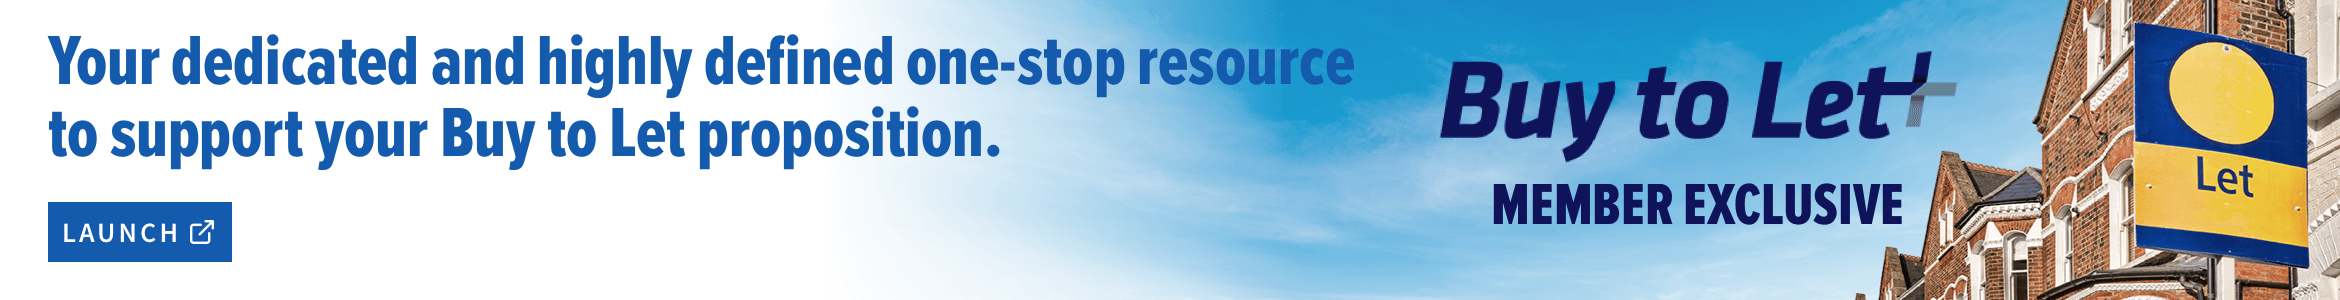 Your dedicated and highly defined one-stop resource to support your But to Let proposition